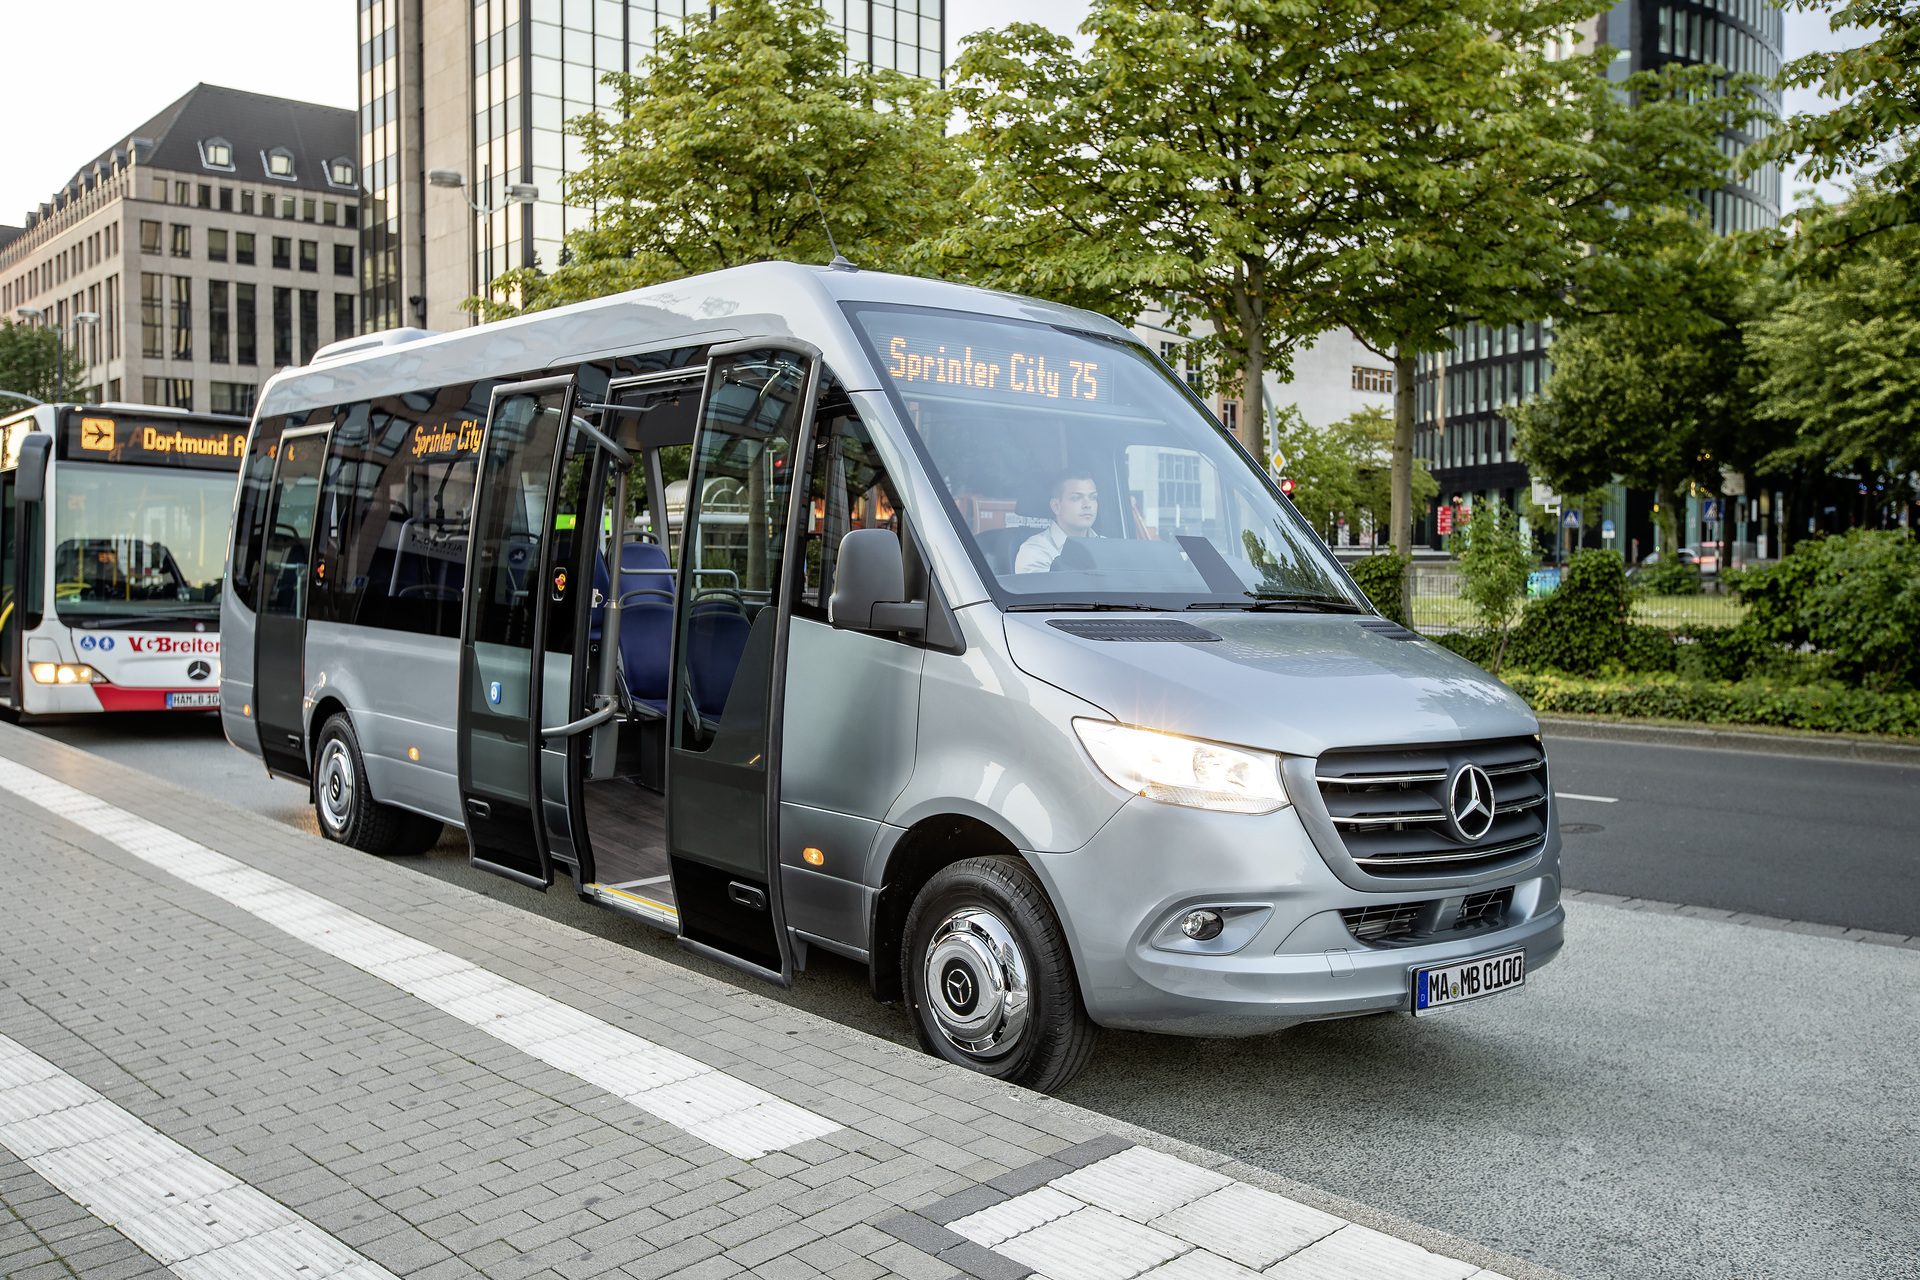 Mercedes-Benz Sprinter City 75, Exterior, silverstone metallic, OM 651 rated at 120 kW/163 hp, displacement 2.14 l, automatic transmission 7G-TRONIC PLUS, length/width/height: 8420/2020/3000 mm, seating: 12+1.